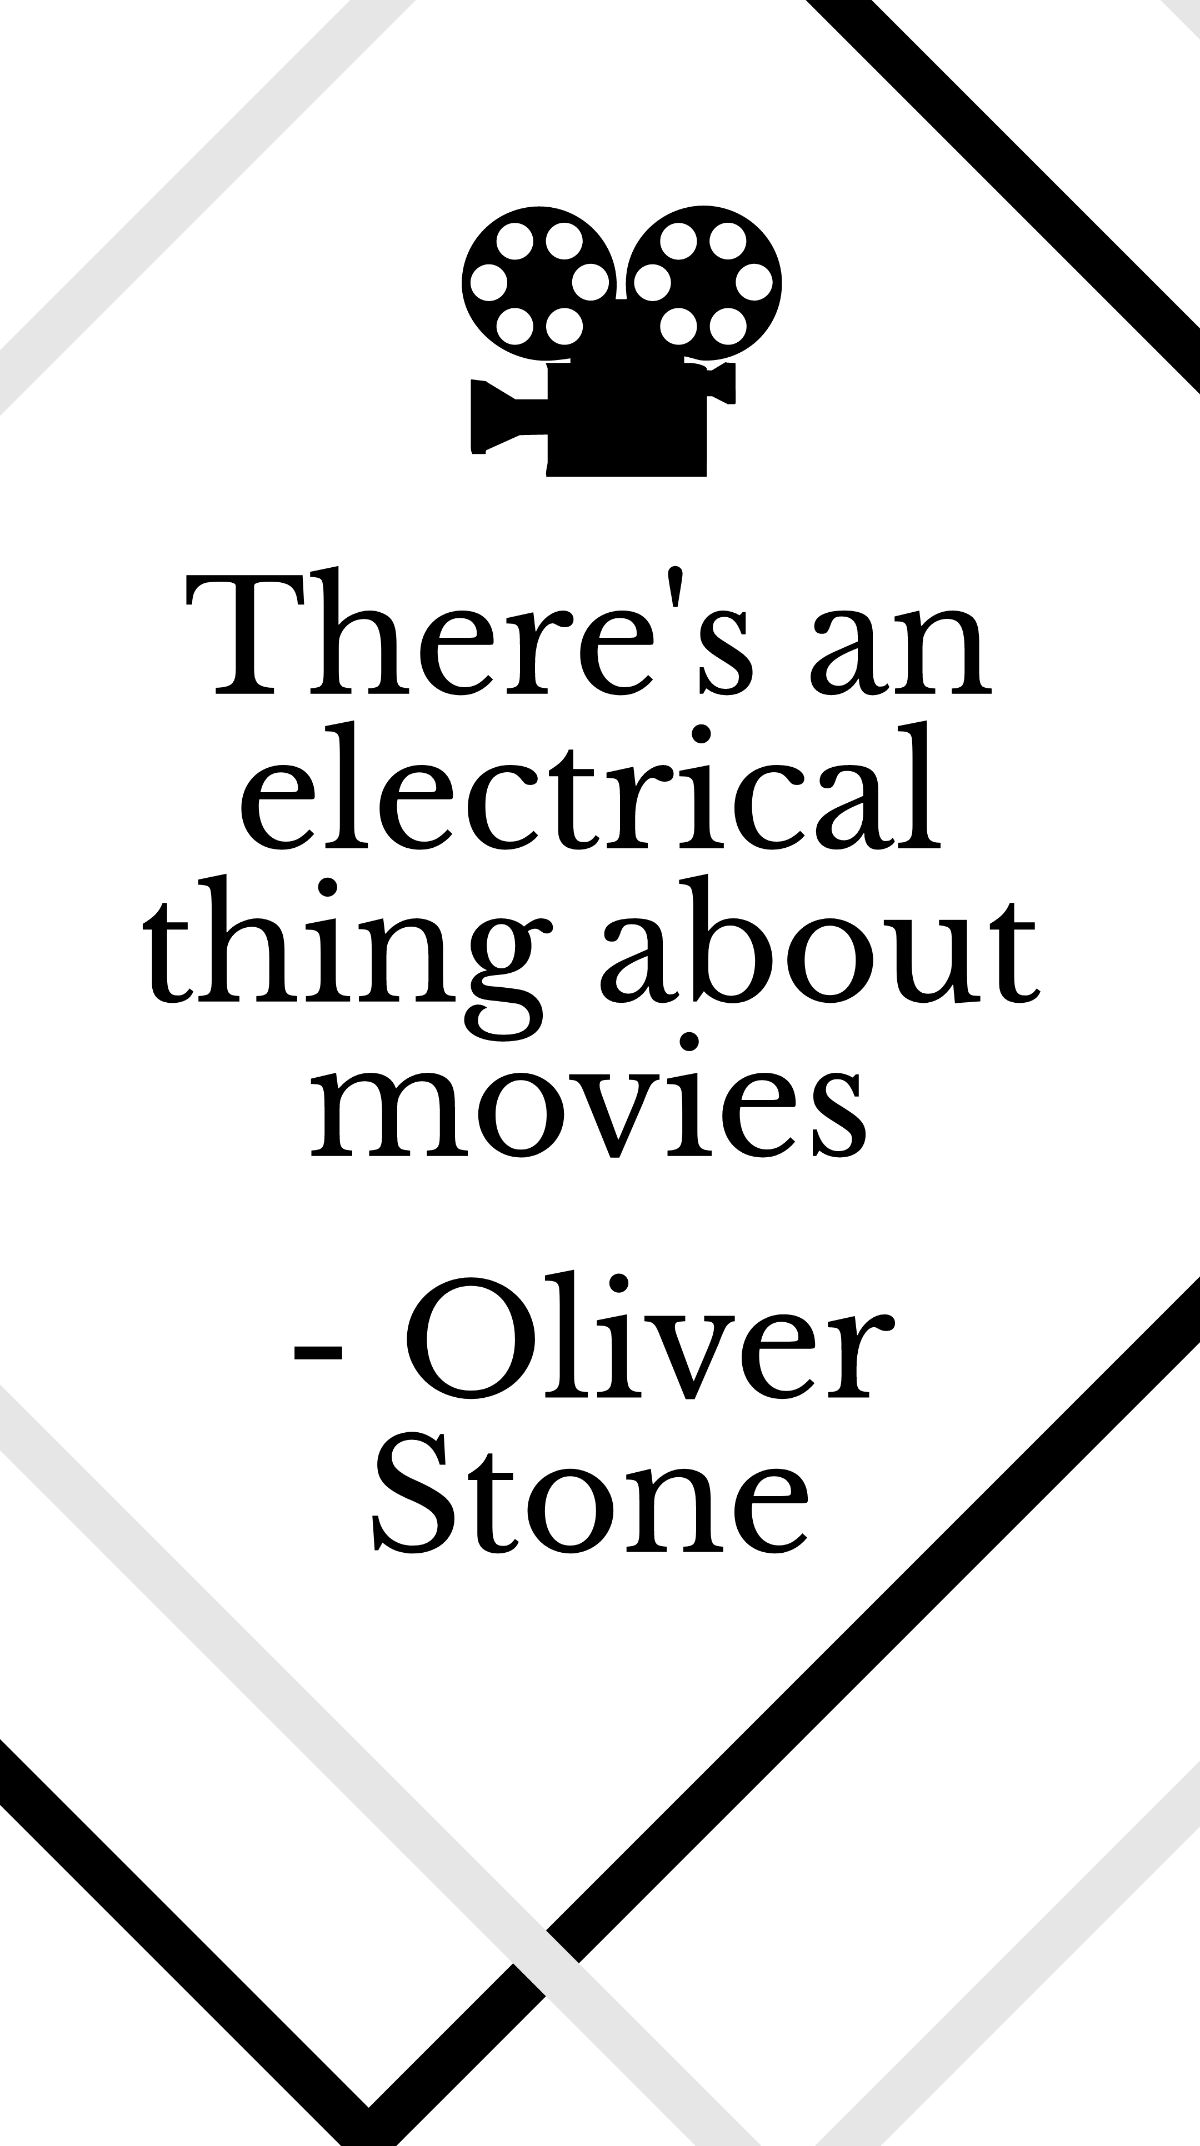 Oliver Stone - There's an electrical thing about movies Template